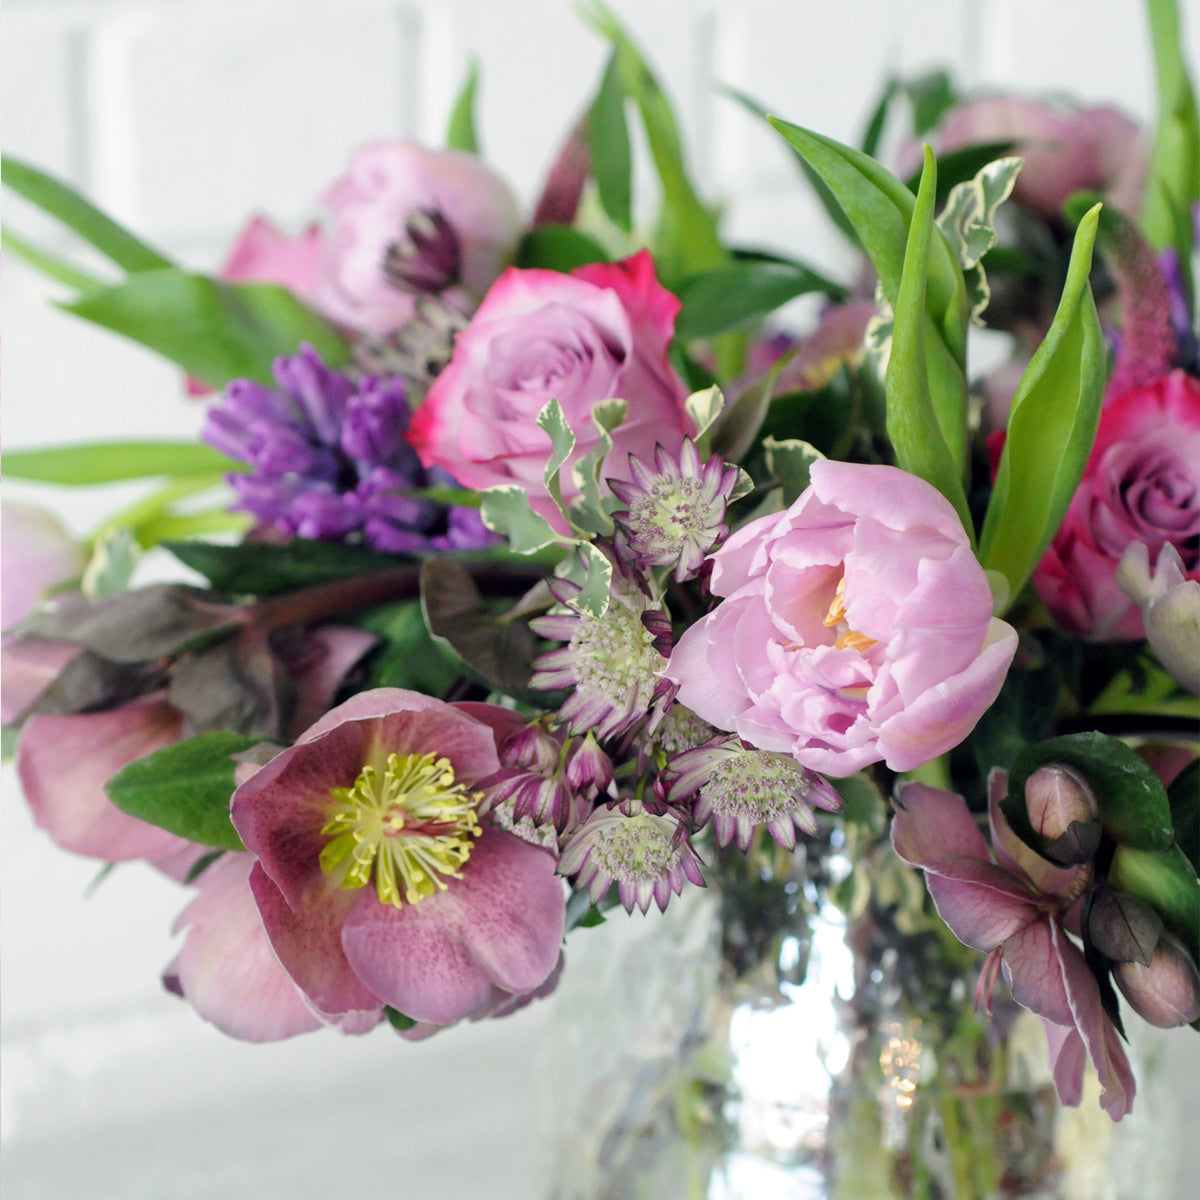 A celebration of Spring Flowers in Purple  close up shows helebore Tulips and Roses with accents of Astrantia 